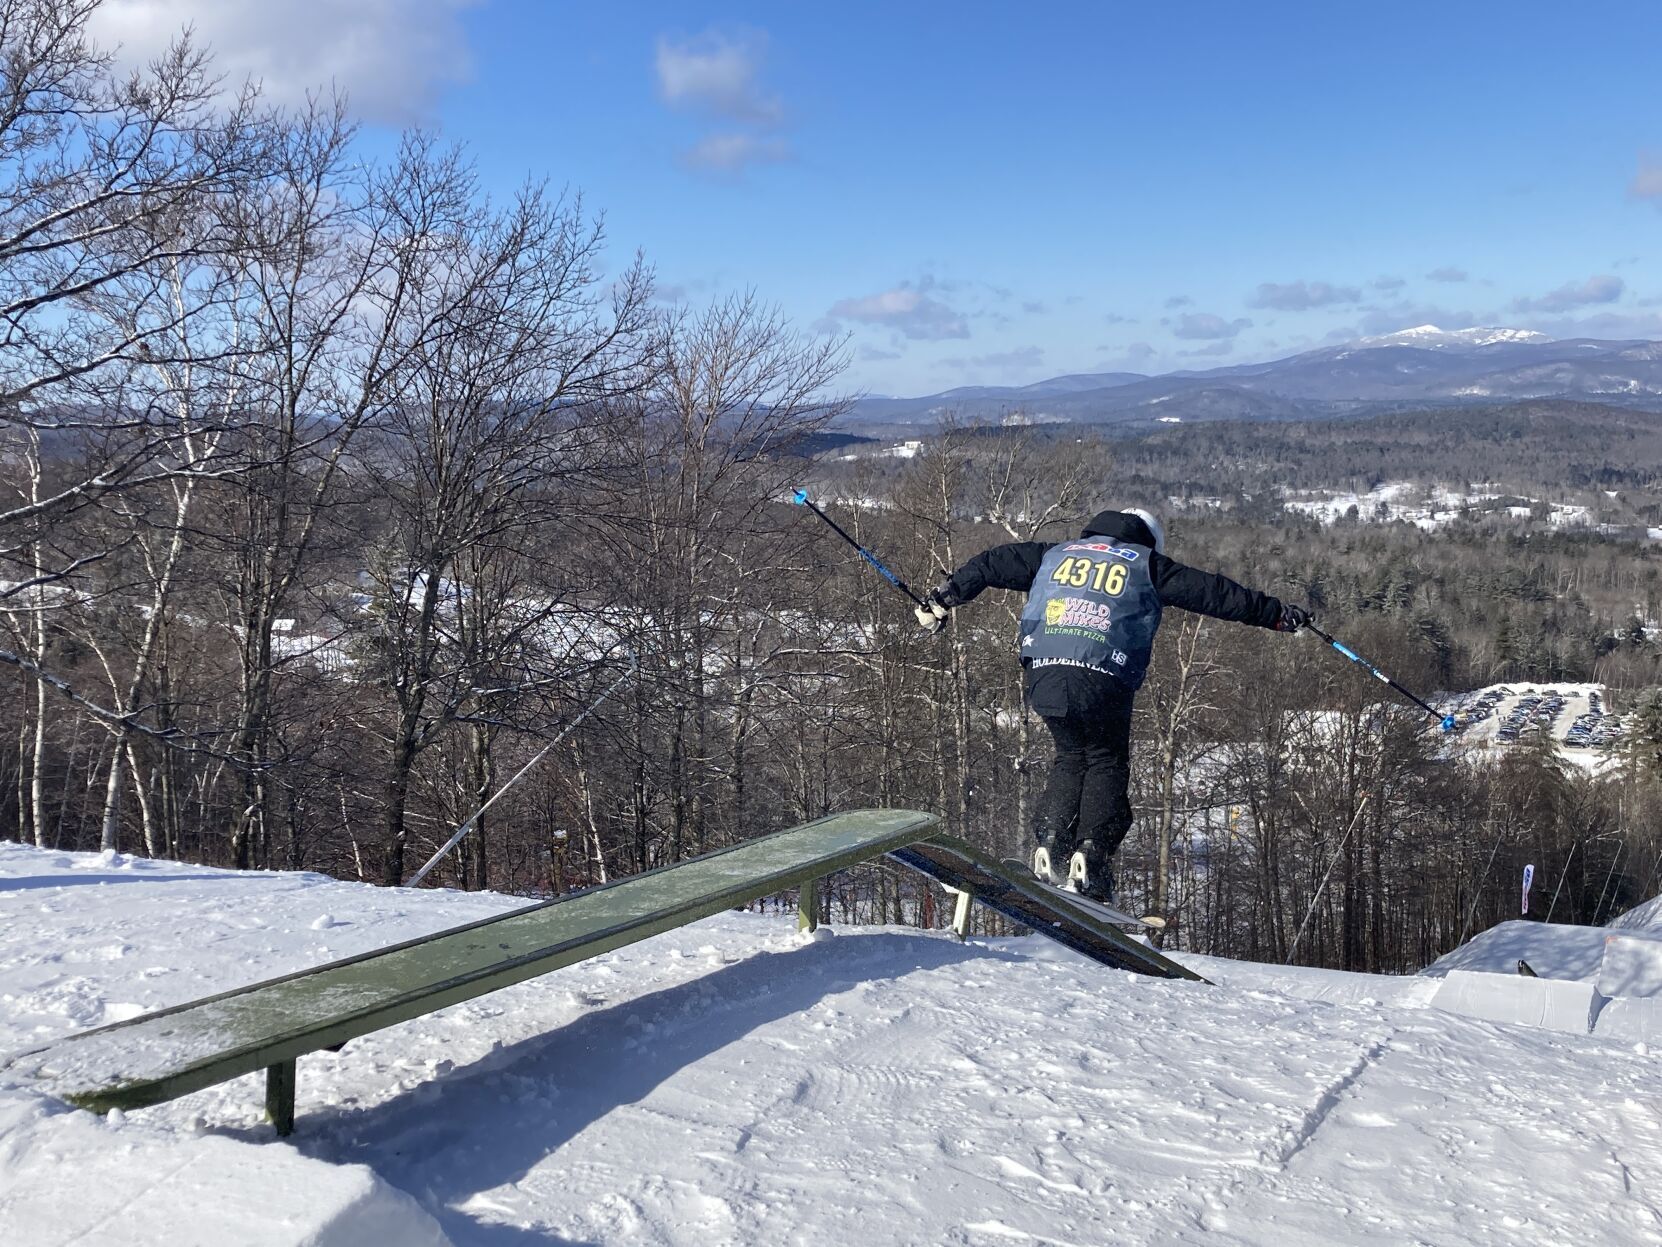 NH Winter: Slopestyle session -- Skiers, snowboarders show off